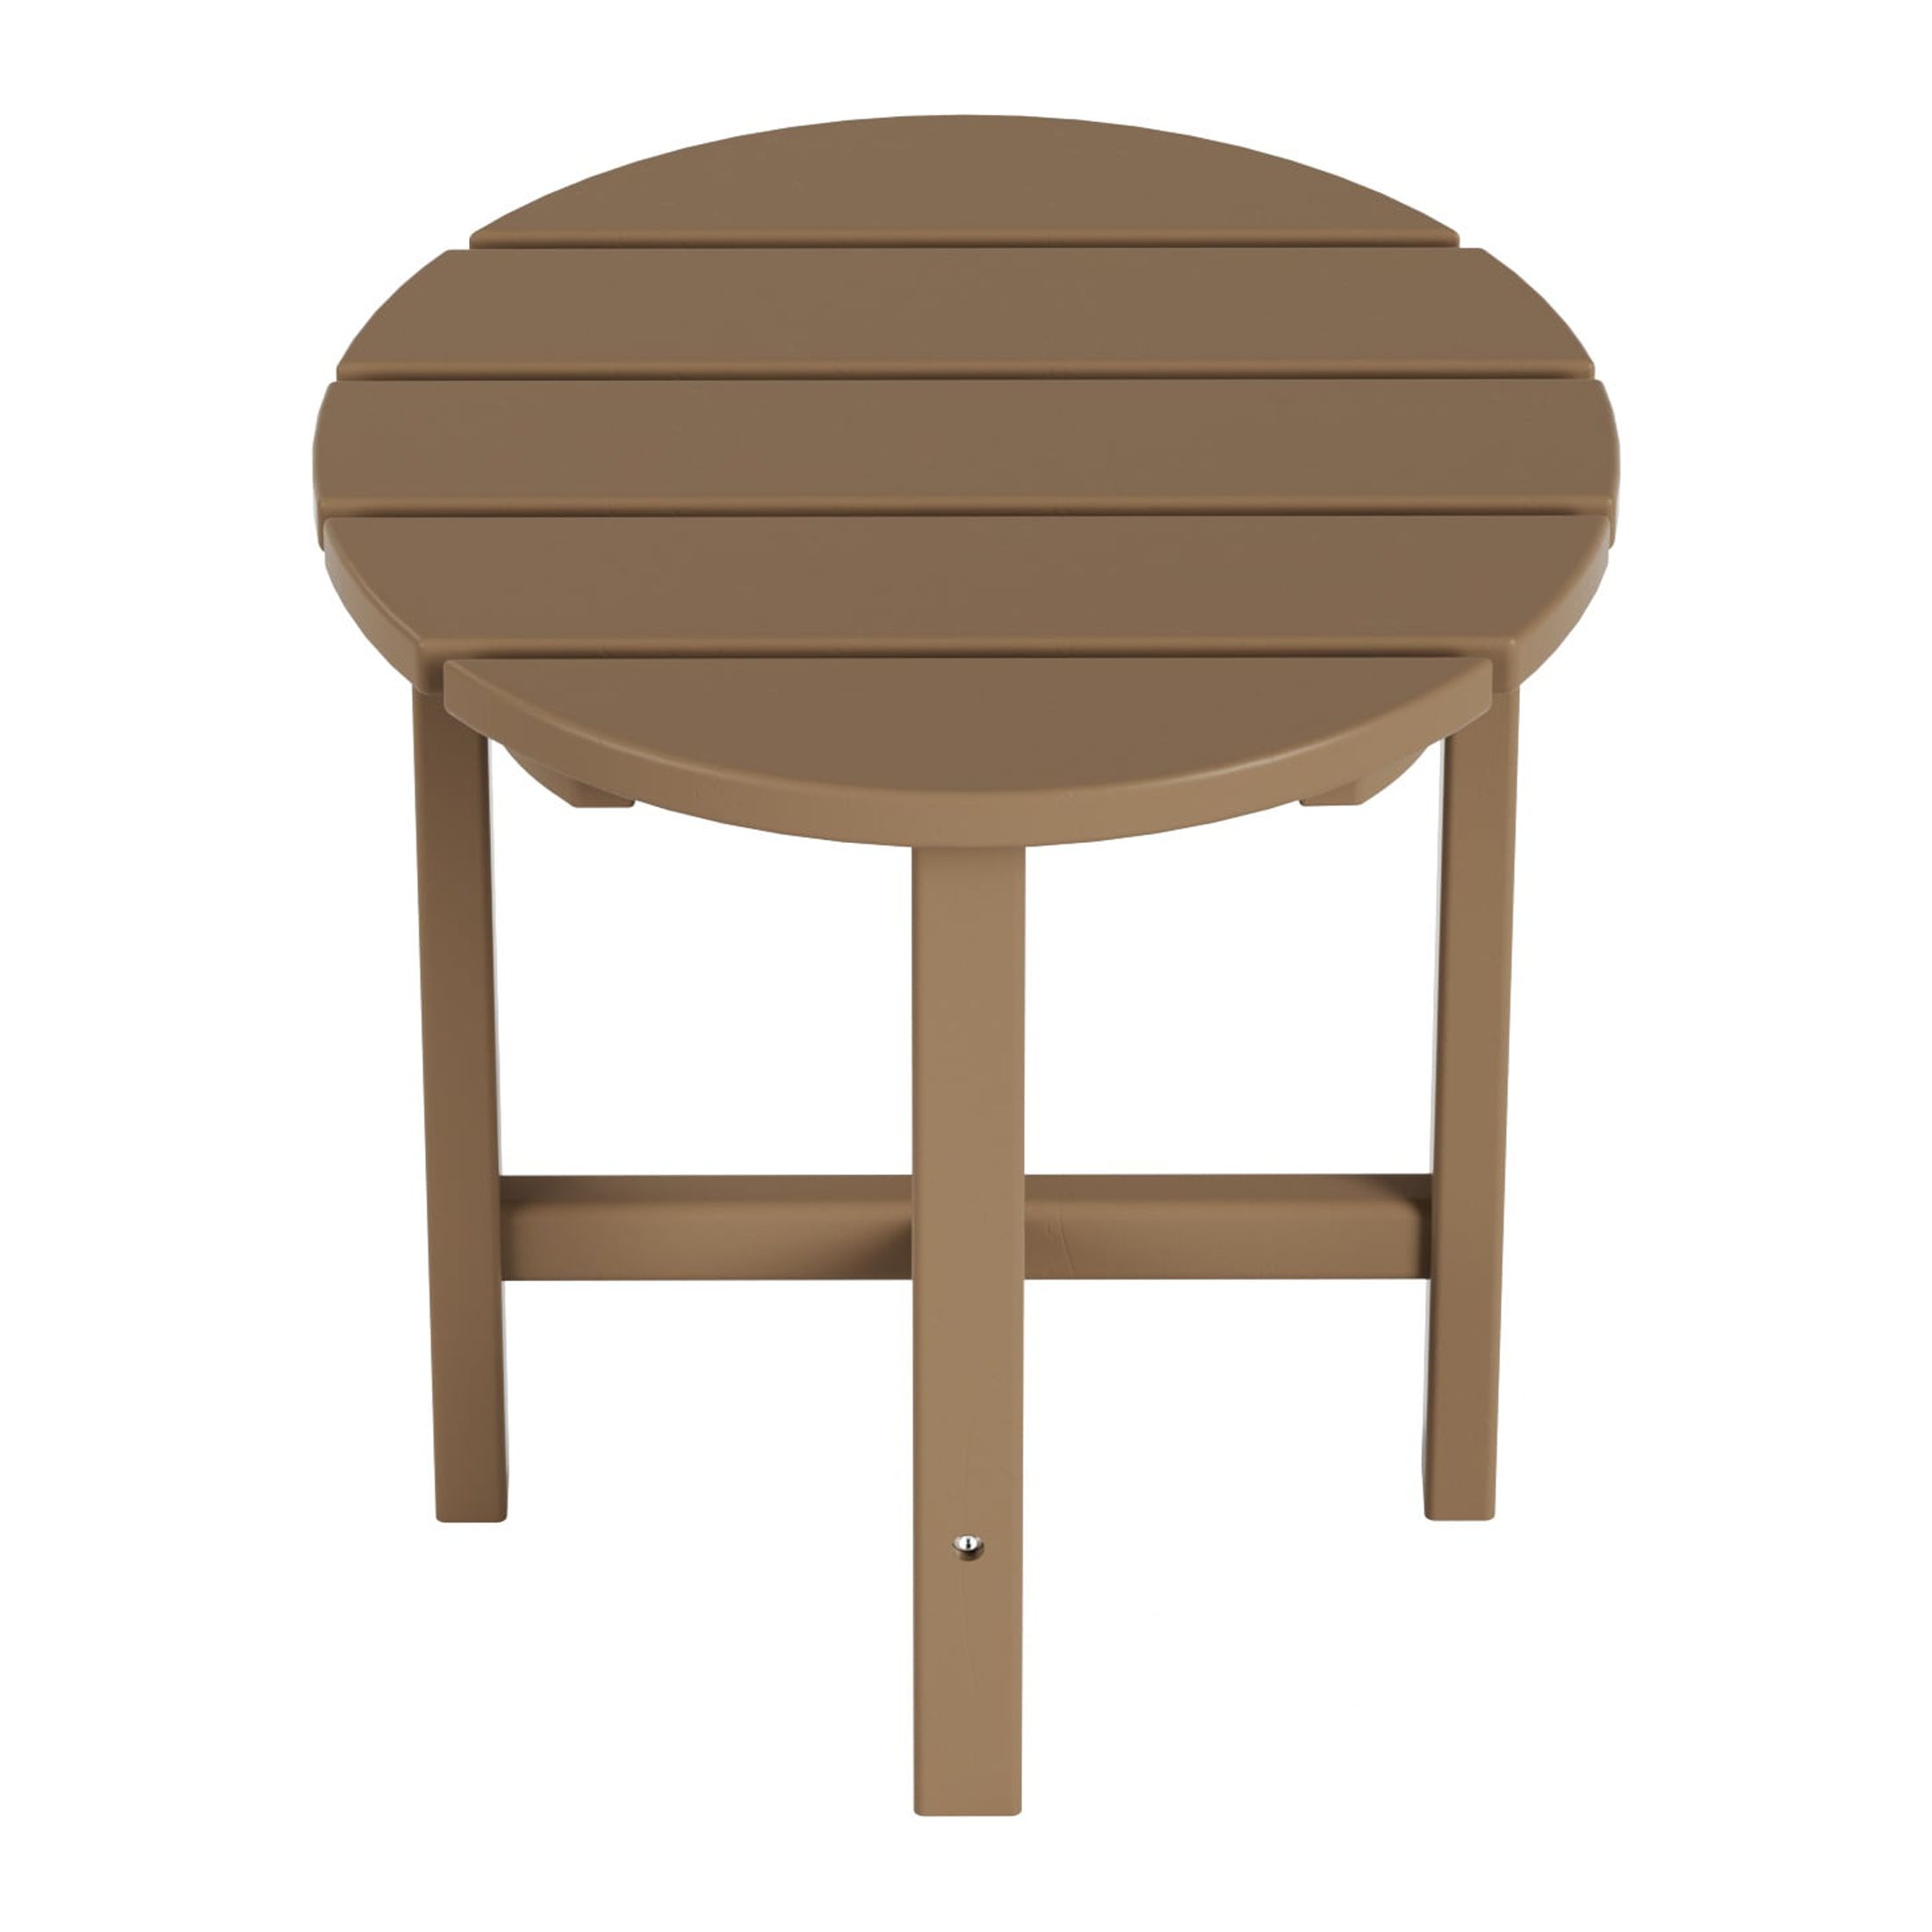 WestinTrends Outdoor Side Table, All Weather Poly Lumber Adirondack Small Patio Table Round End Table for Pool Balcony Deck Porch Lawn Backyard, Weathered Wood - image 4 of 7